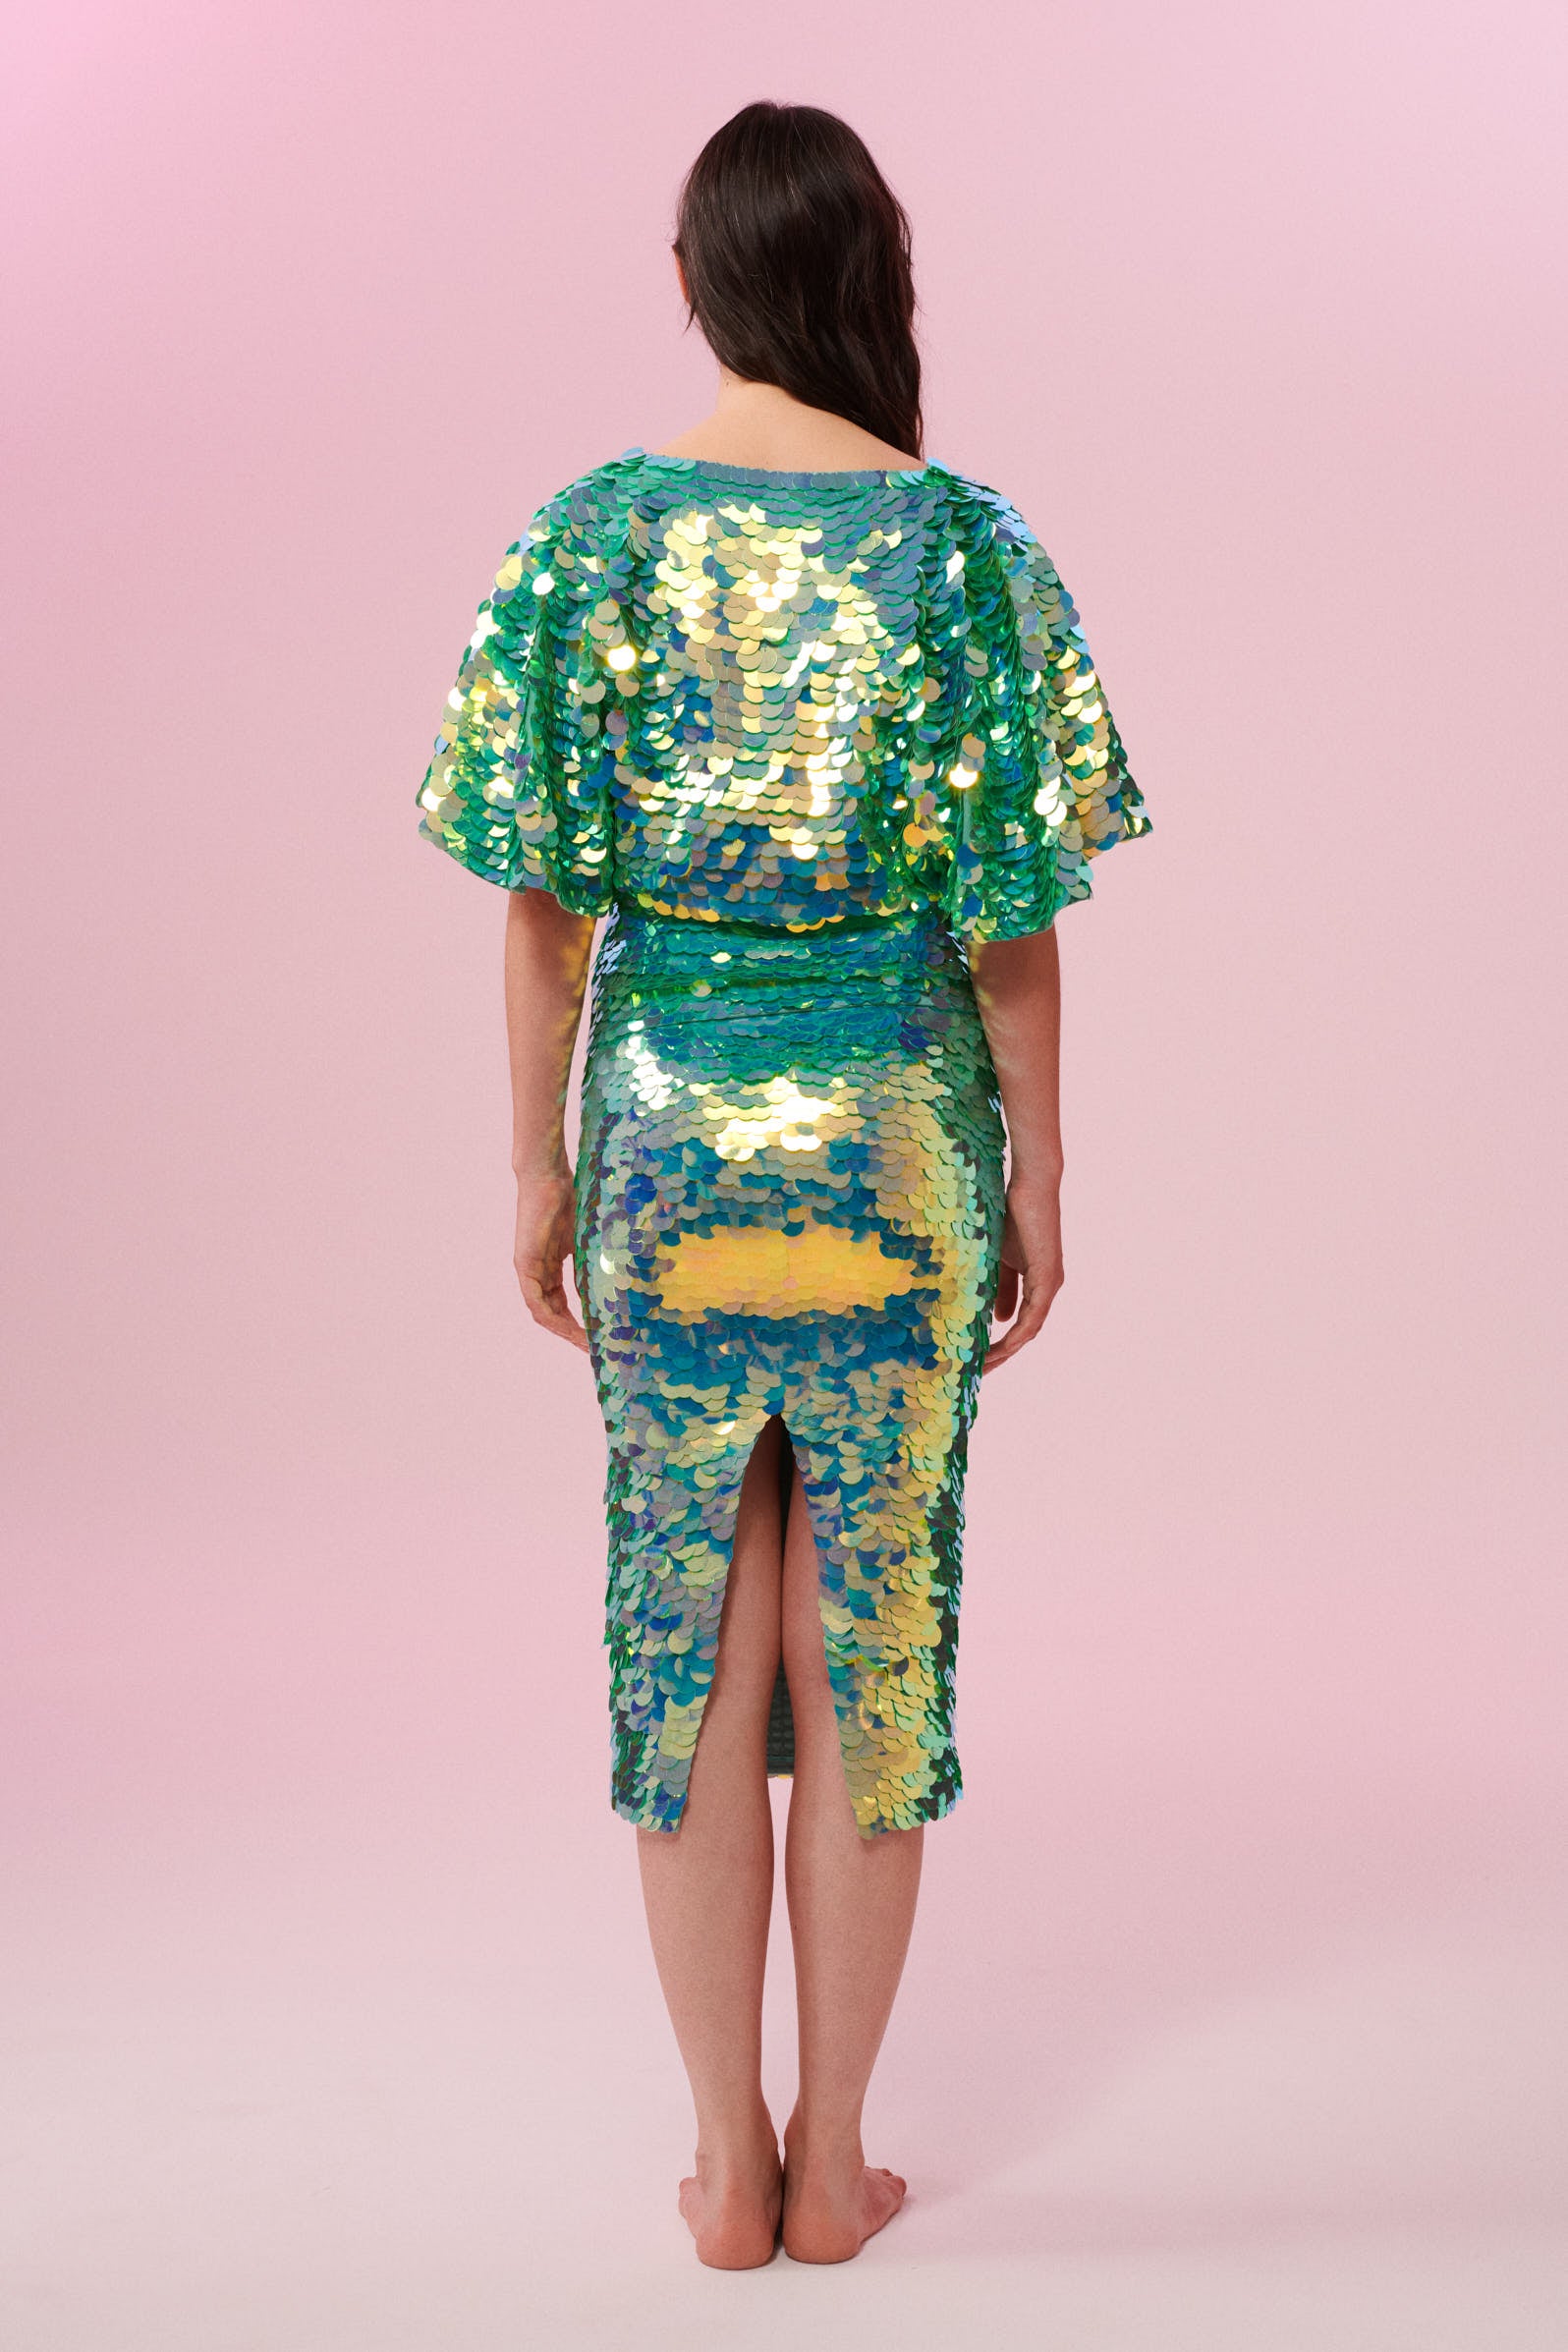 Back view of a dark haired woman wearing a Rosa Bloom green sequin mid length sequin tube skirt